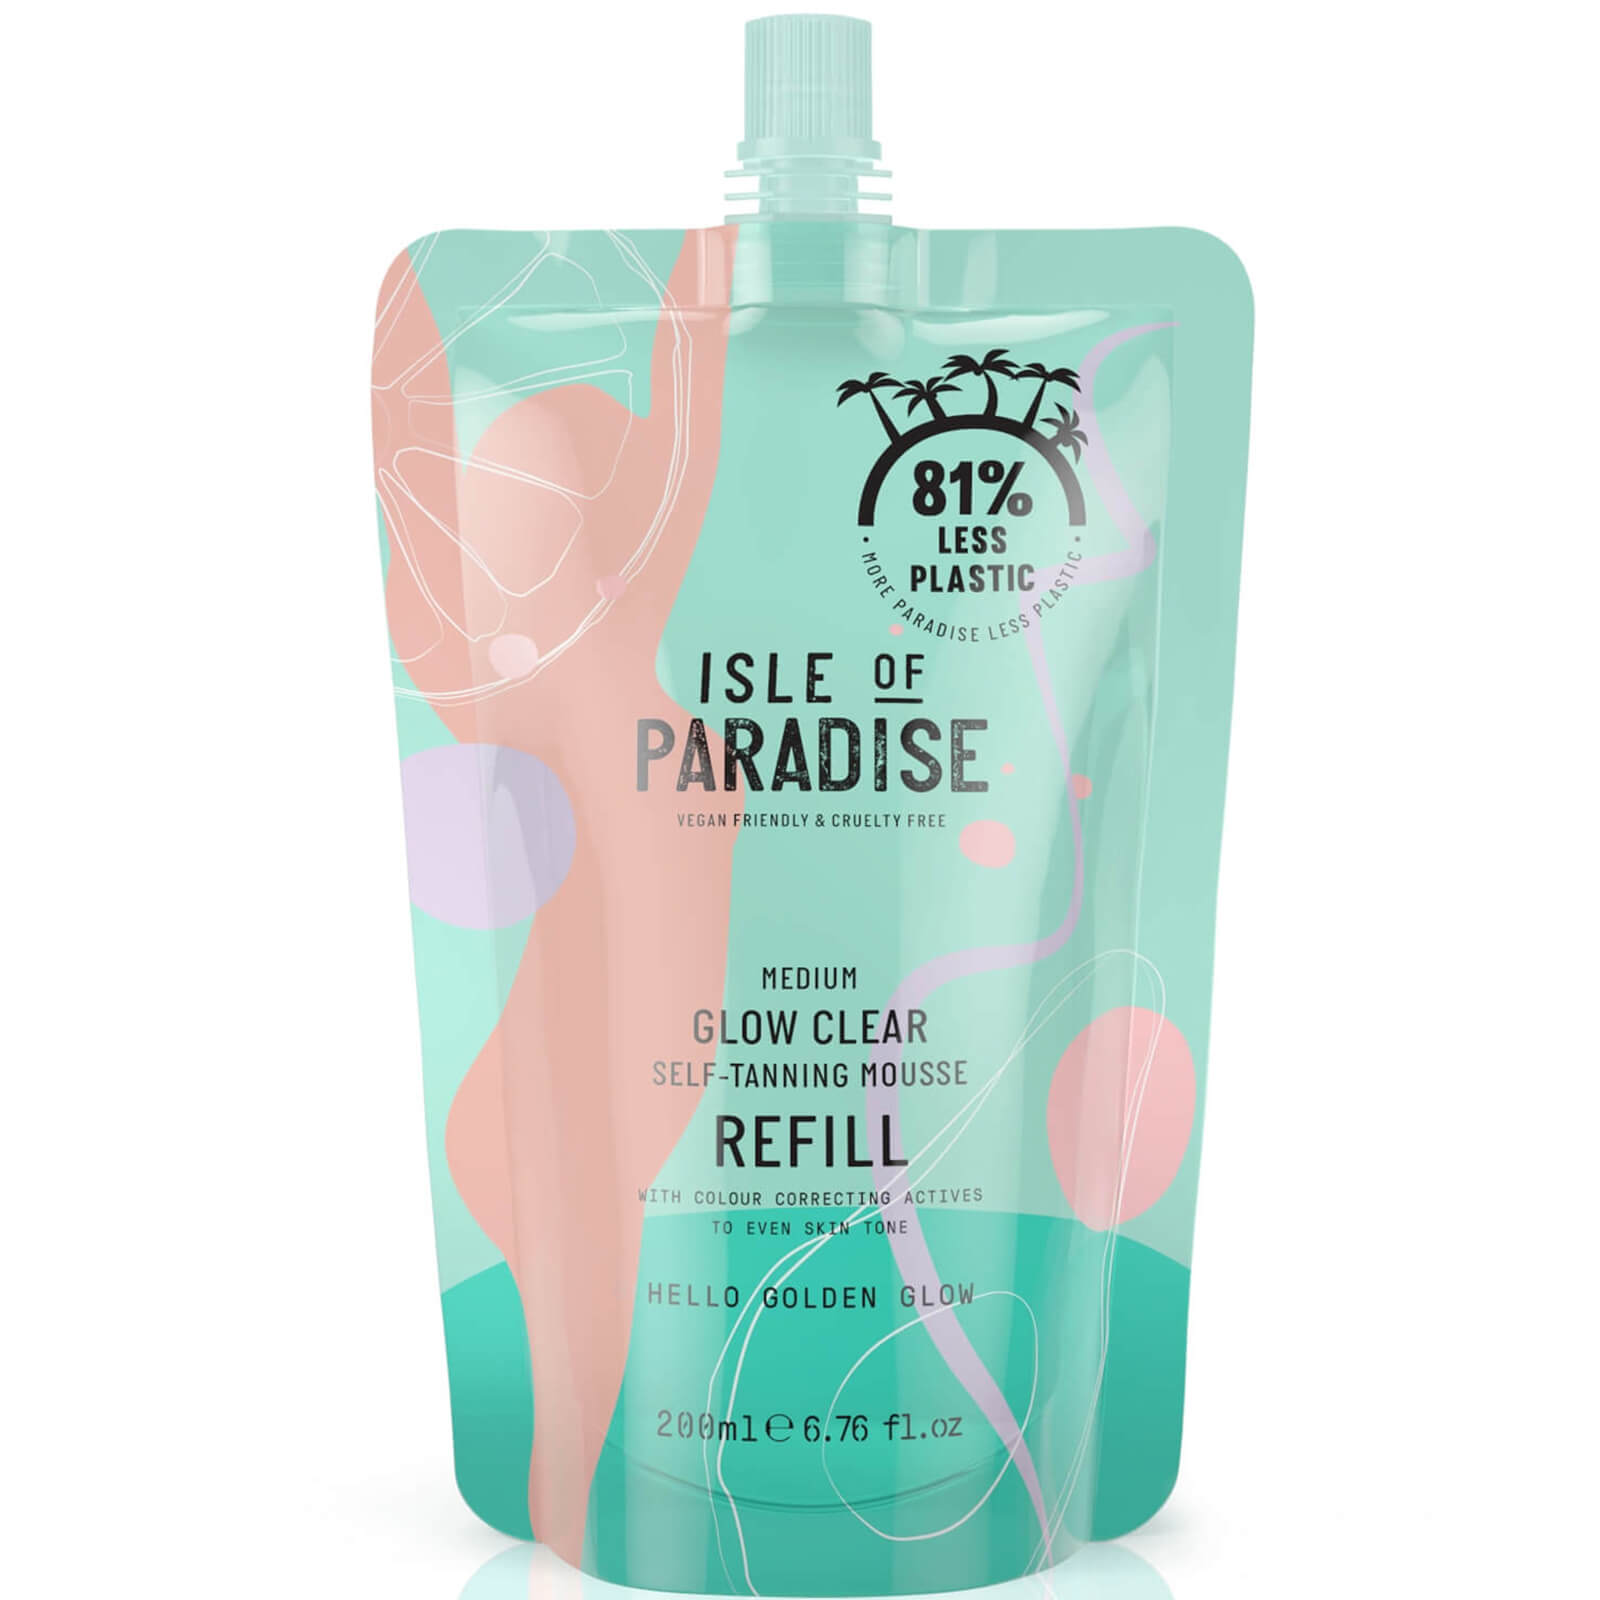 Isle of Paradise Glow Clear Self-Tanning Mousse Refill - Medium 200ml